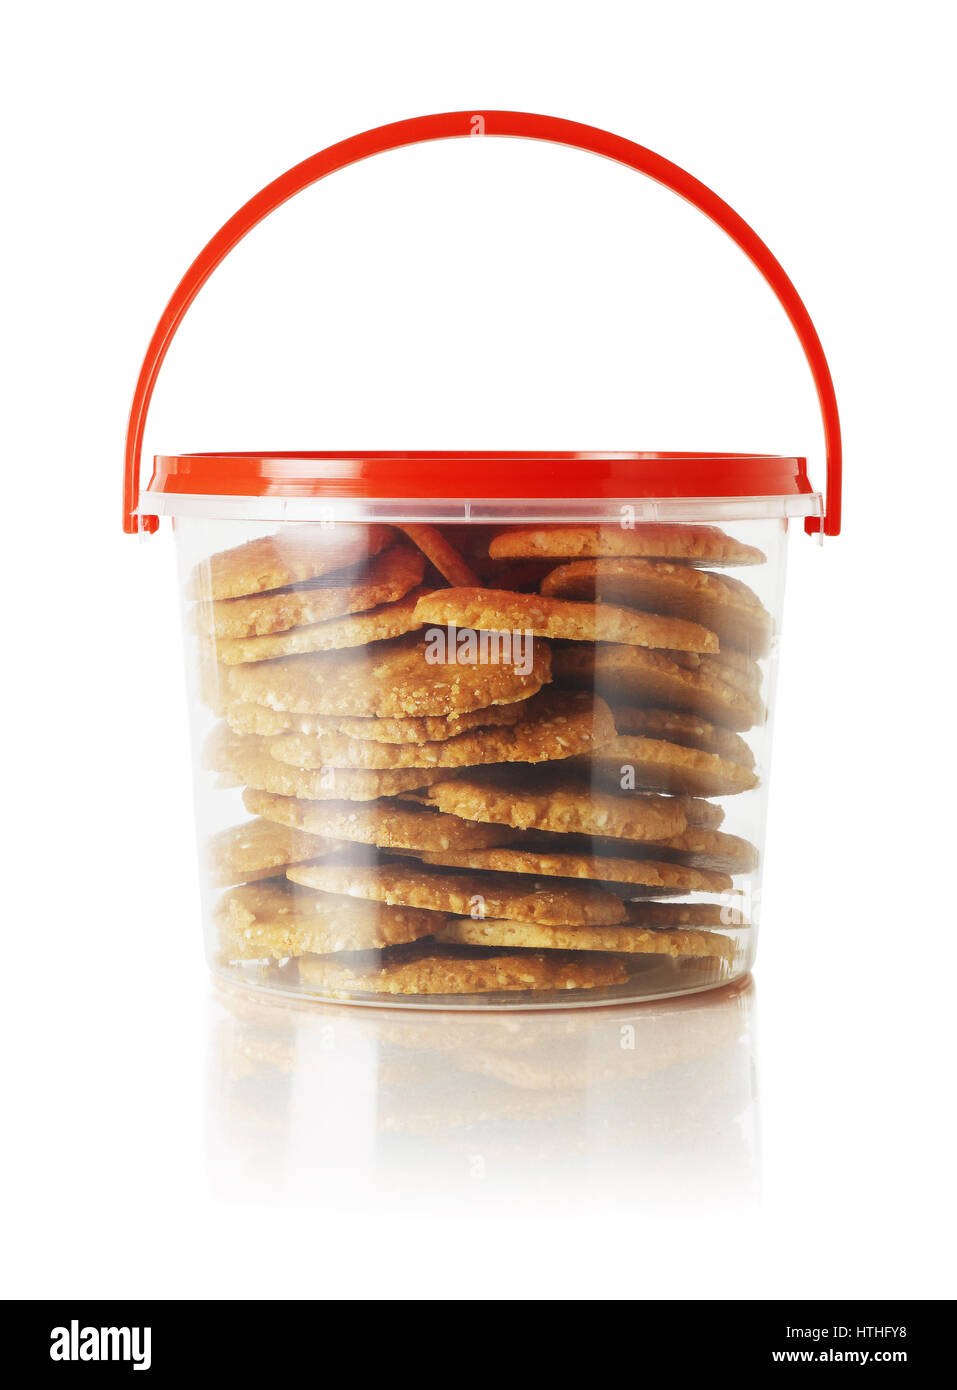 https://c8.alamy.com/comp/HTHFY8/cookies-in-plastic-container-with-handle-on-white-background-HTHFY8.jpg